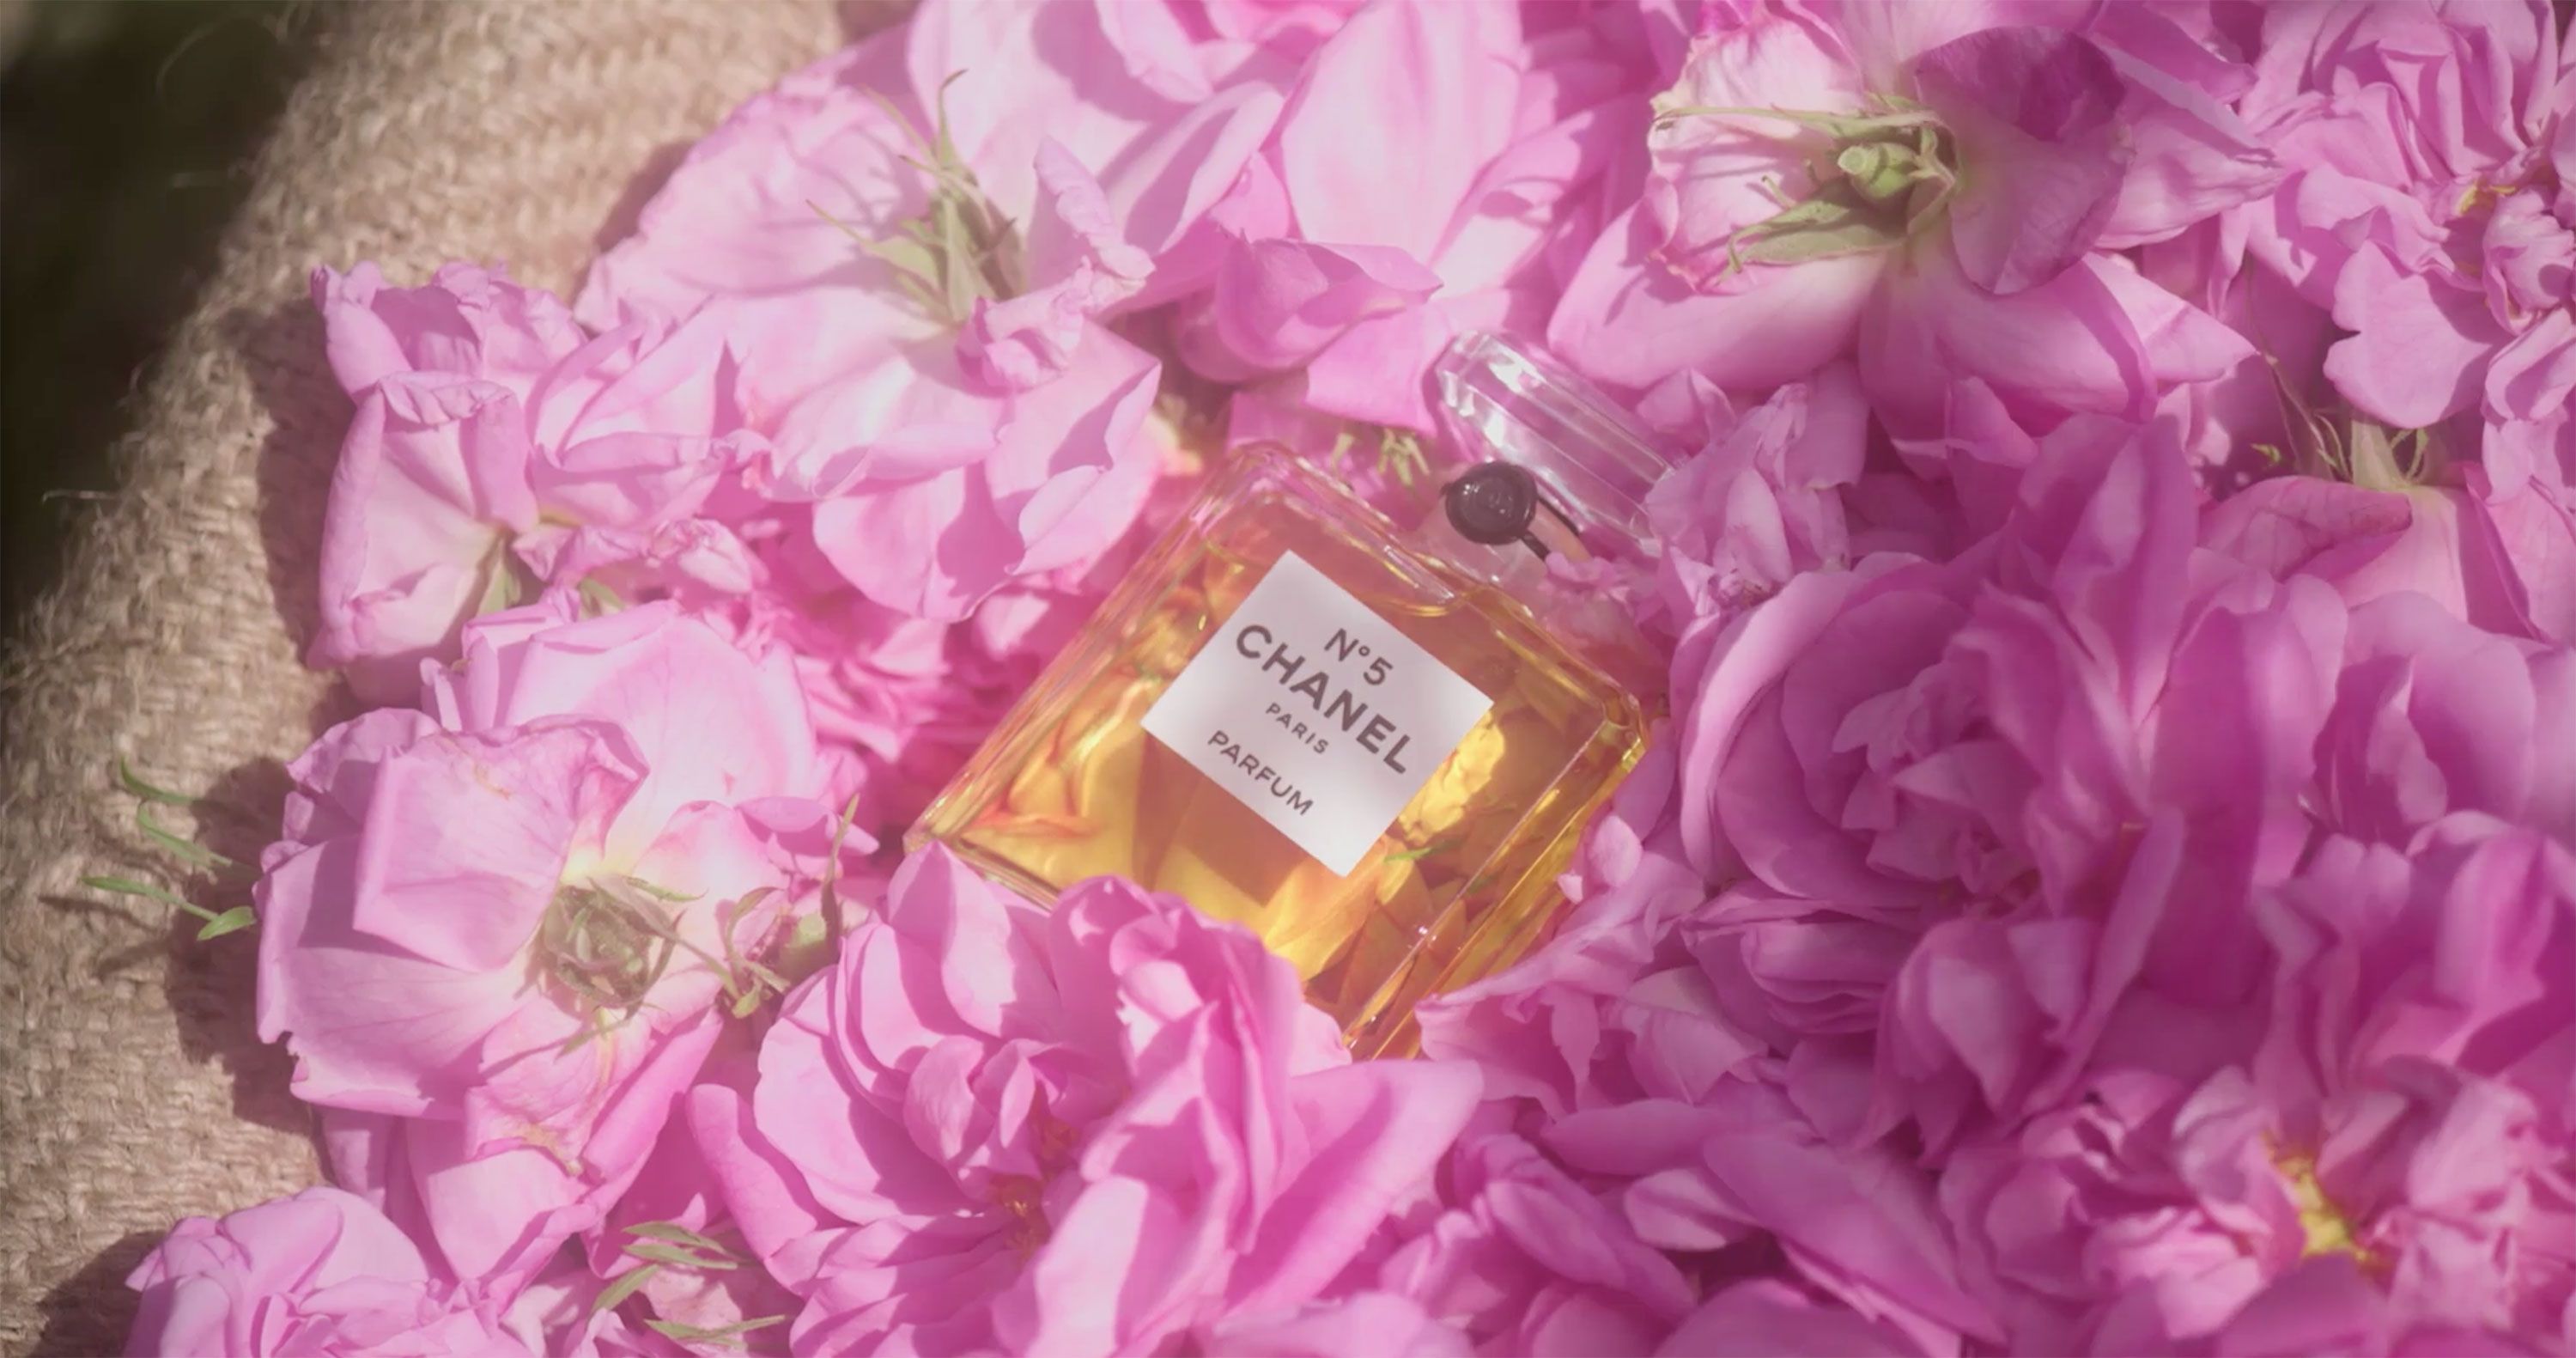 See All the May Roses That Go into a Bottle of Chanel No. 5